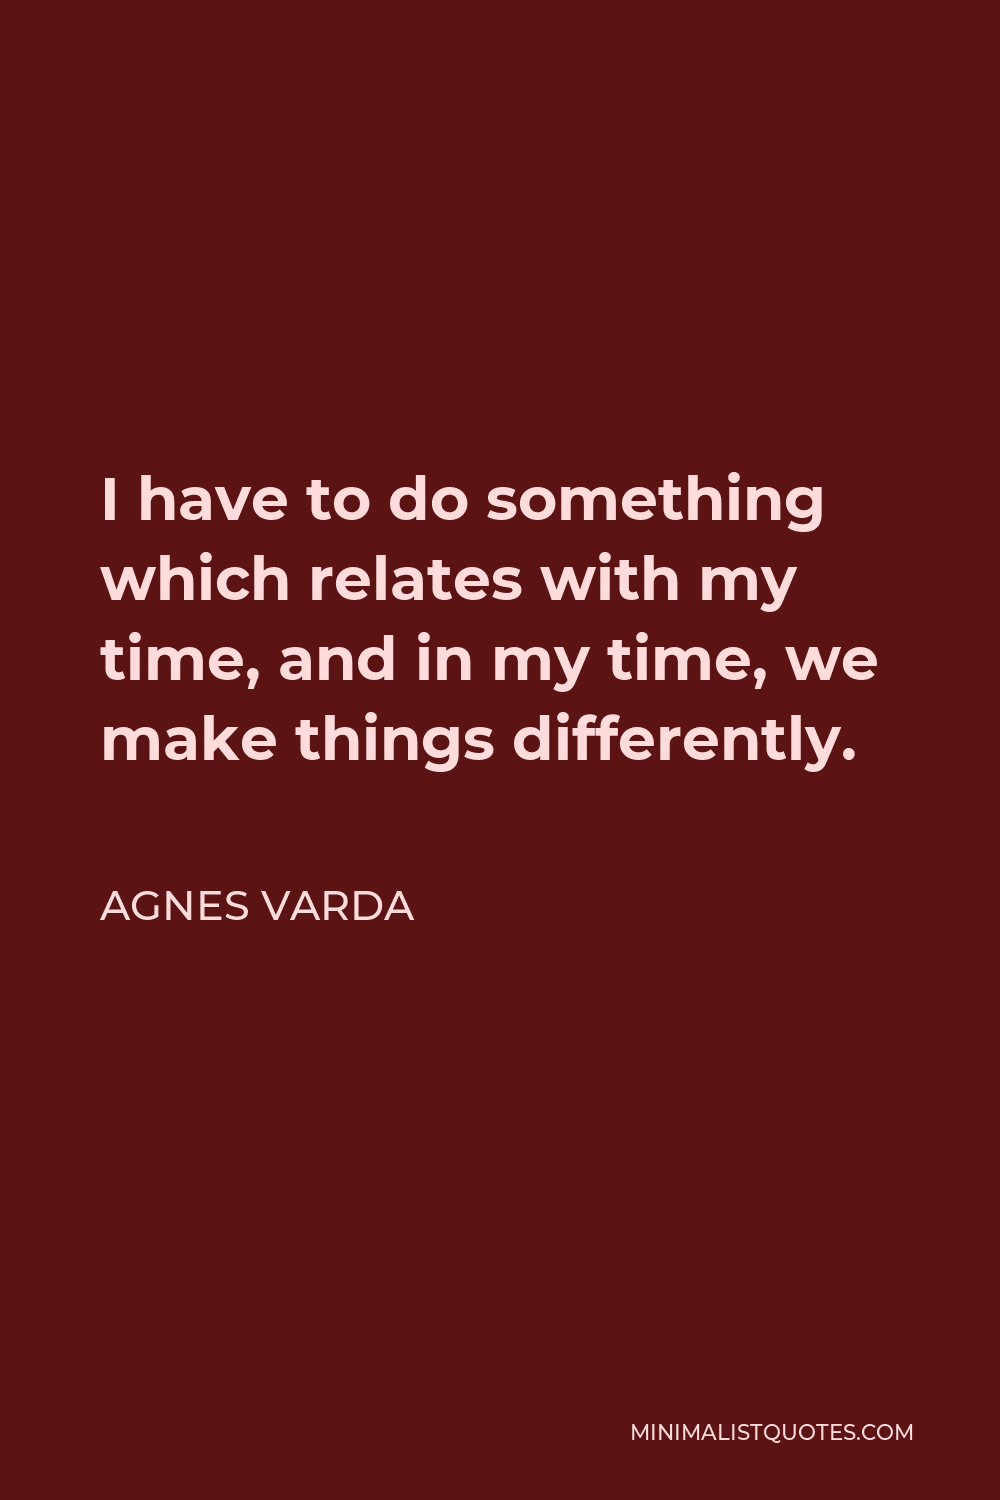 Agnes Varda Quote - I have to do something which relates with my time, and in my time, we make things differently.